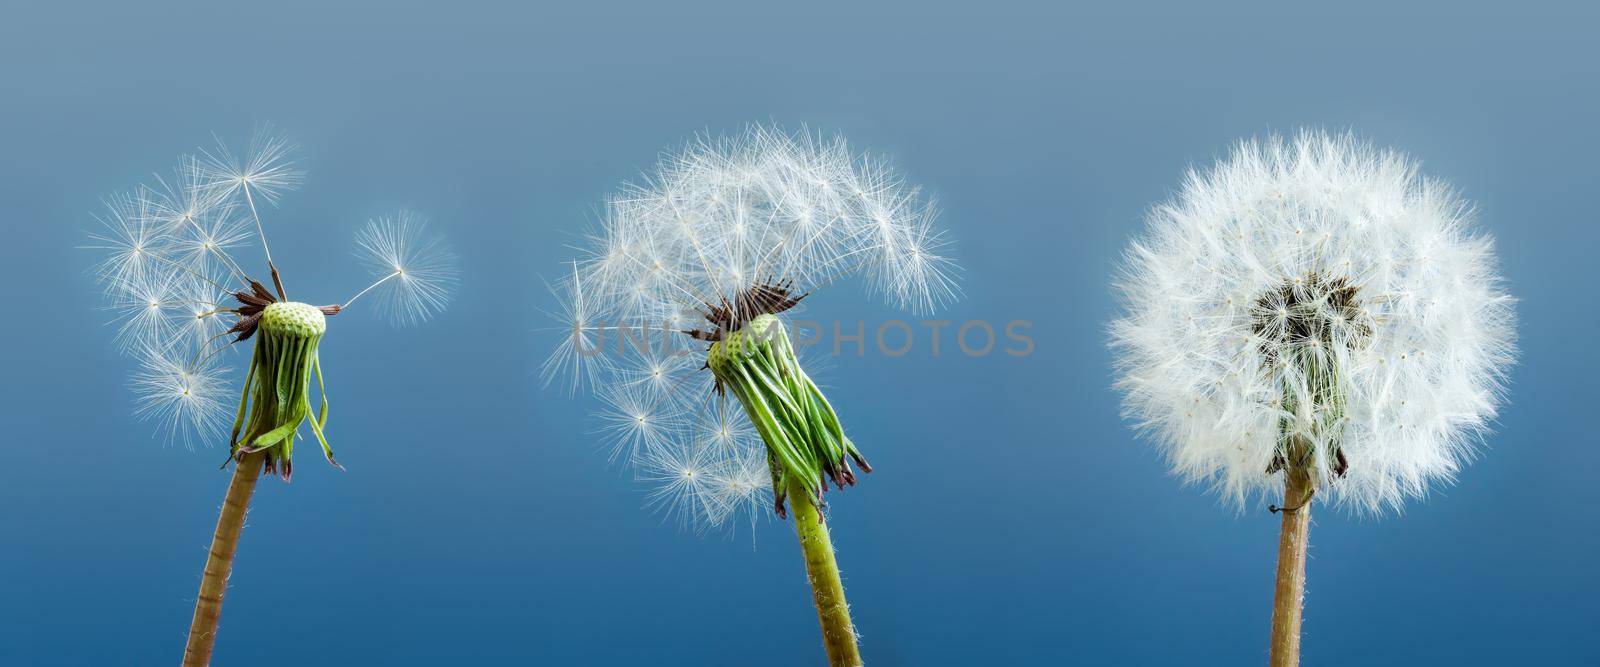 Dandelions as a symbol of mental state and stress. by designer491